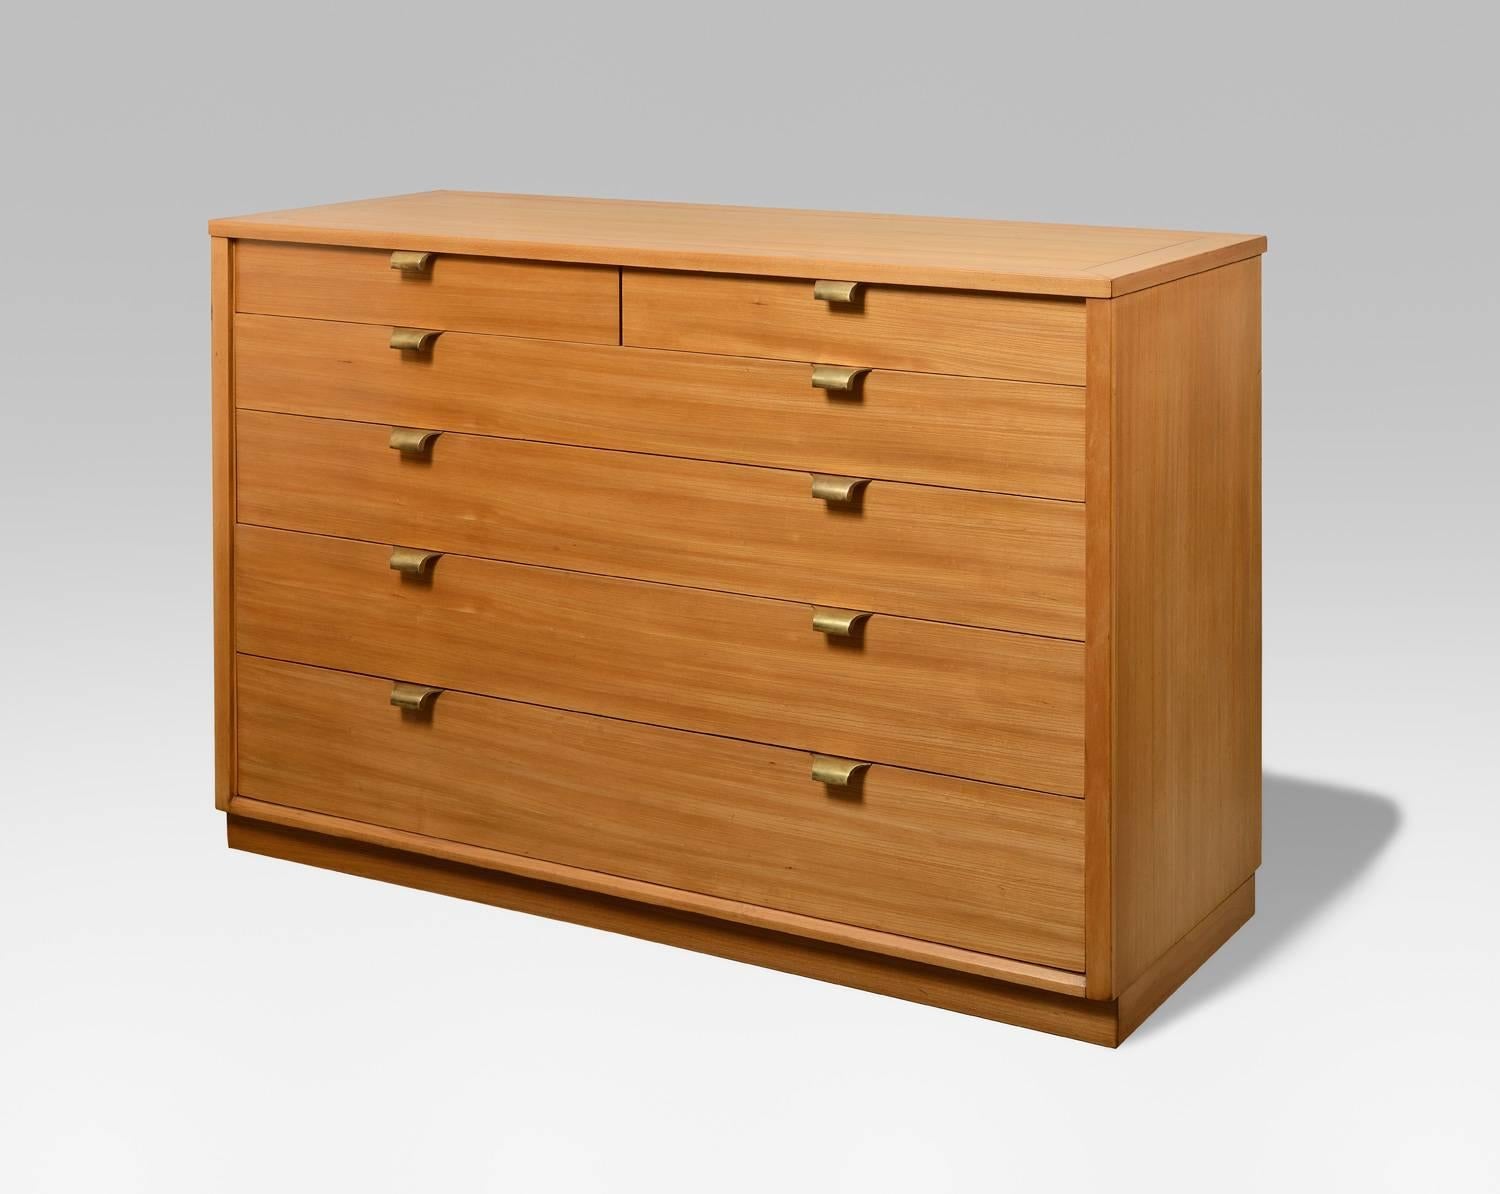 Elegant pair of chest of drawers by Ed. Wormley (USA, 1907-1995),
1950s,
for Drexel Manufactory.
Solid satinwood.
Brass pulls.
Six drawers in front.
Measures: H 83 cm, L 122 cm, P 48 cm.

In good condition, fully restored.